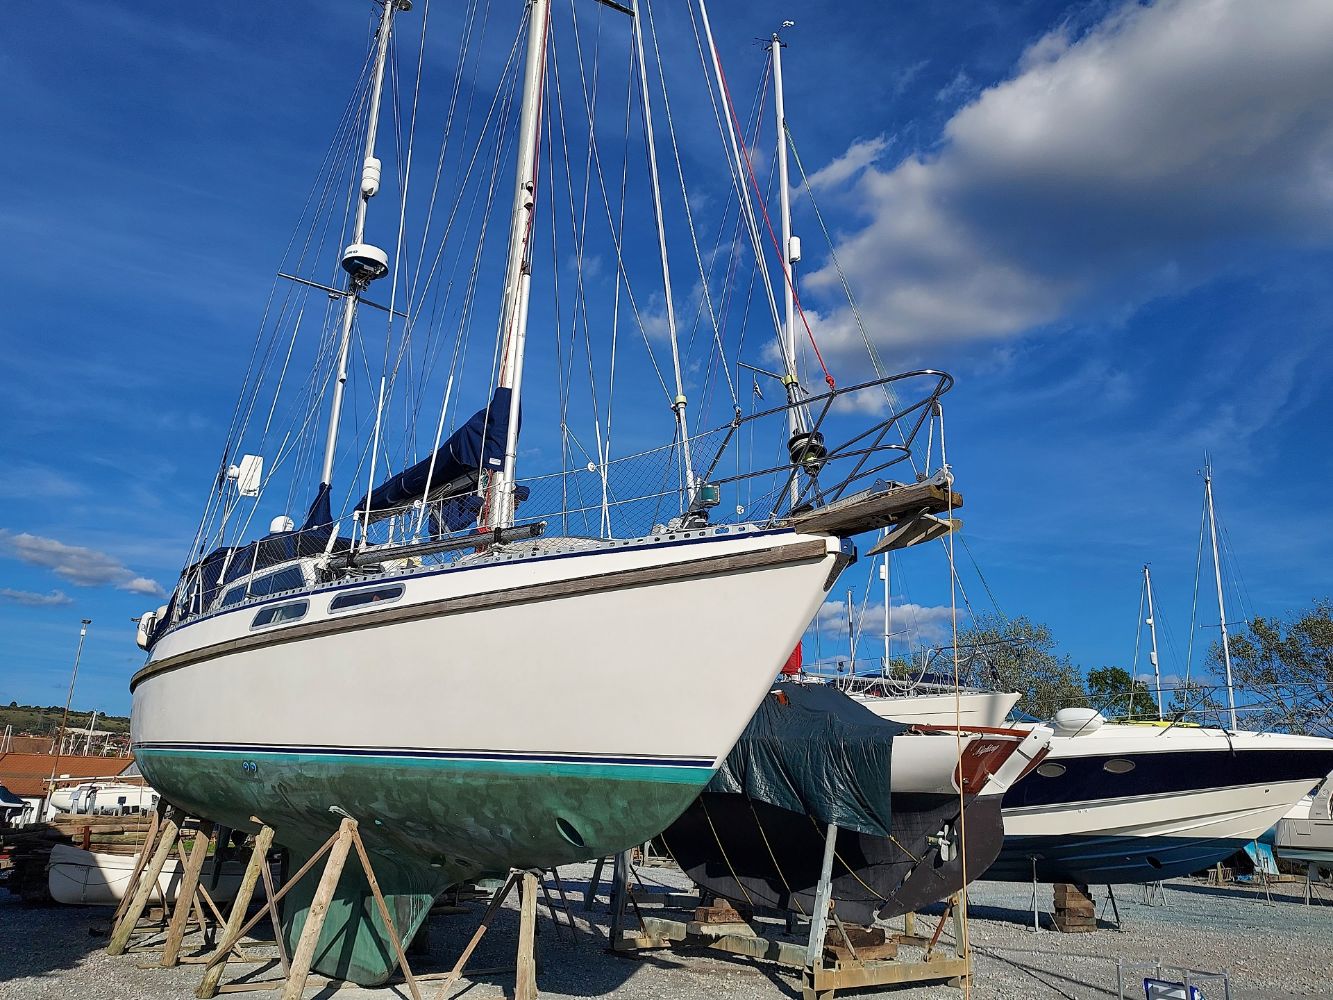 General Auction - Used Boat Sale - Colvic Victor 40 "Silver Wind"